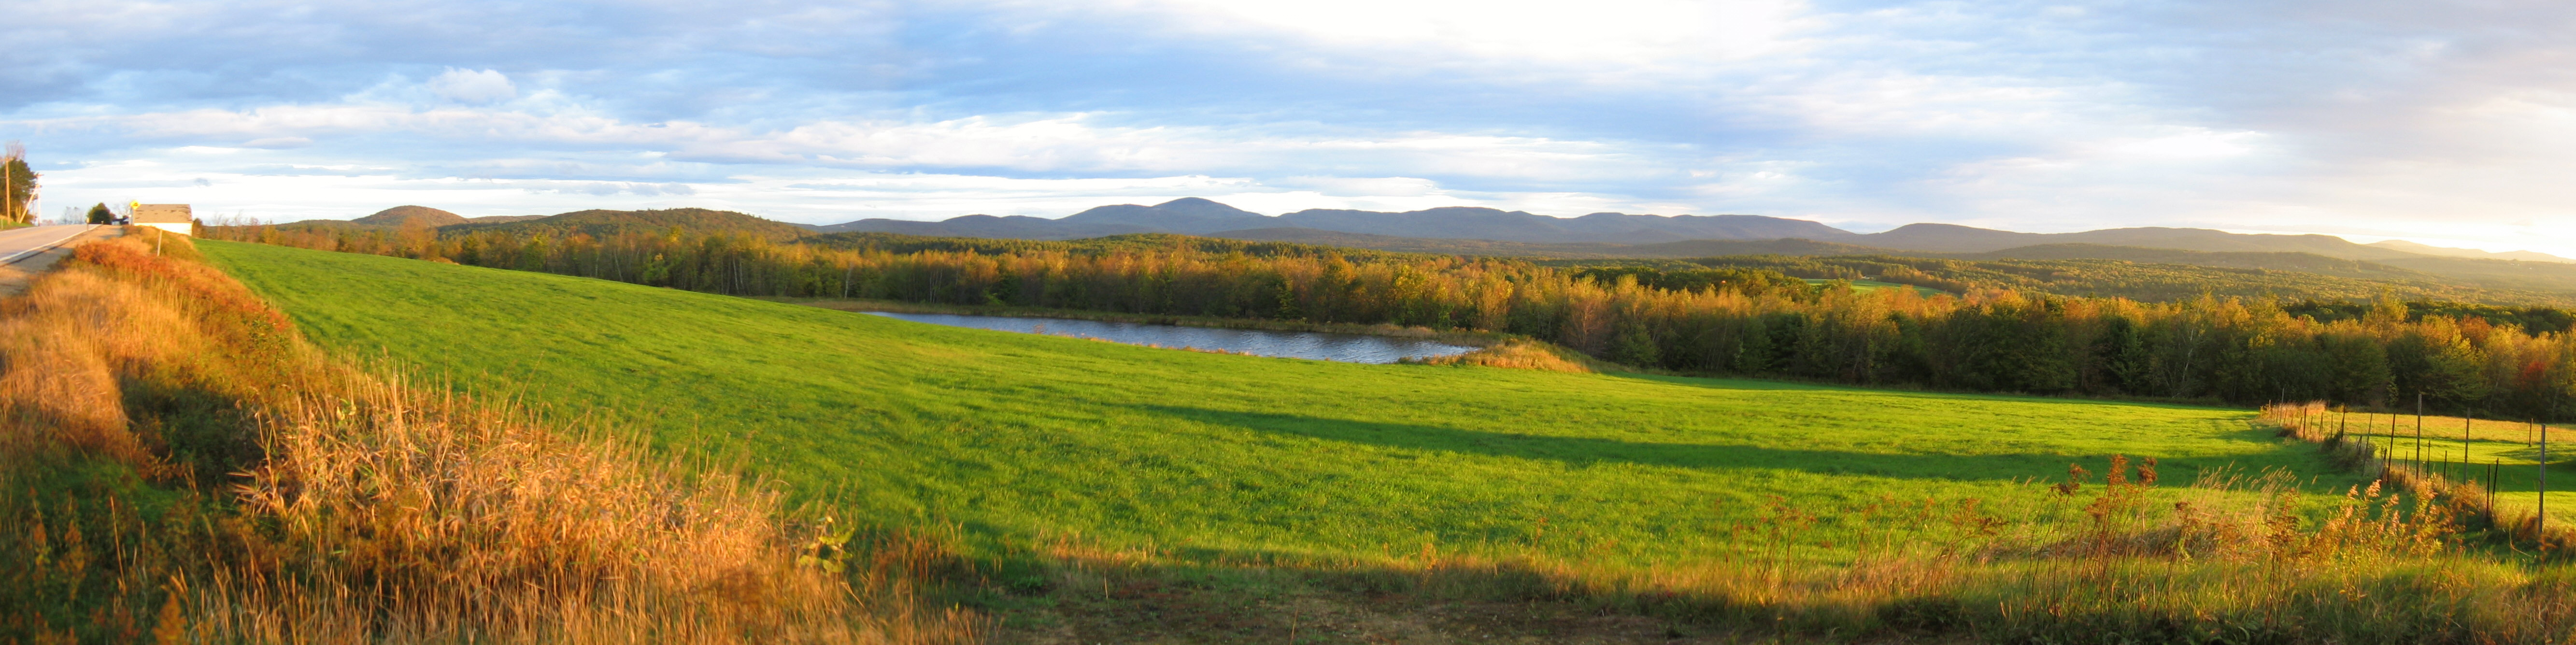 View of Belknap Mountain Range from Frisky Hill in Gilmanton October 2011 by T Howe